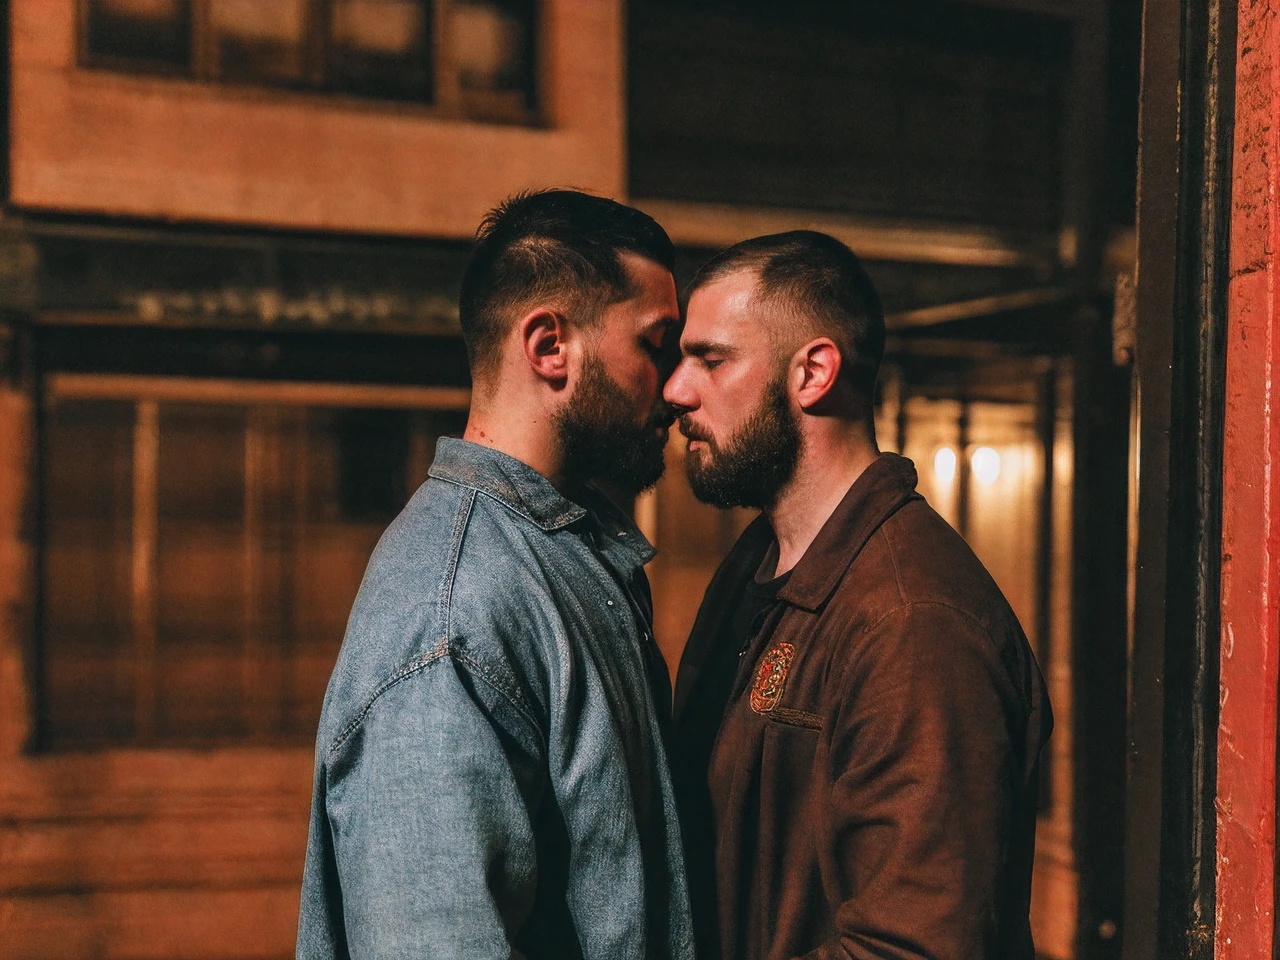 forbidden love, masterpiece, best quality, 2boys, adult males, beards, chavs, rough, dirty, Mancunian, mean, bullies, druggies, skinheads, in the neighbourhood, , soft kiss , realistic, dramatic lighting, atmospheric, intricate detail,